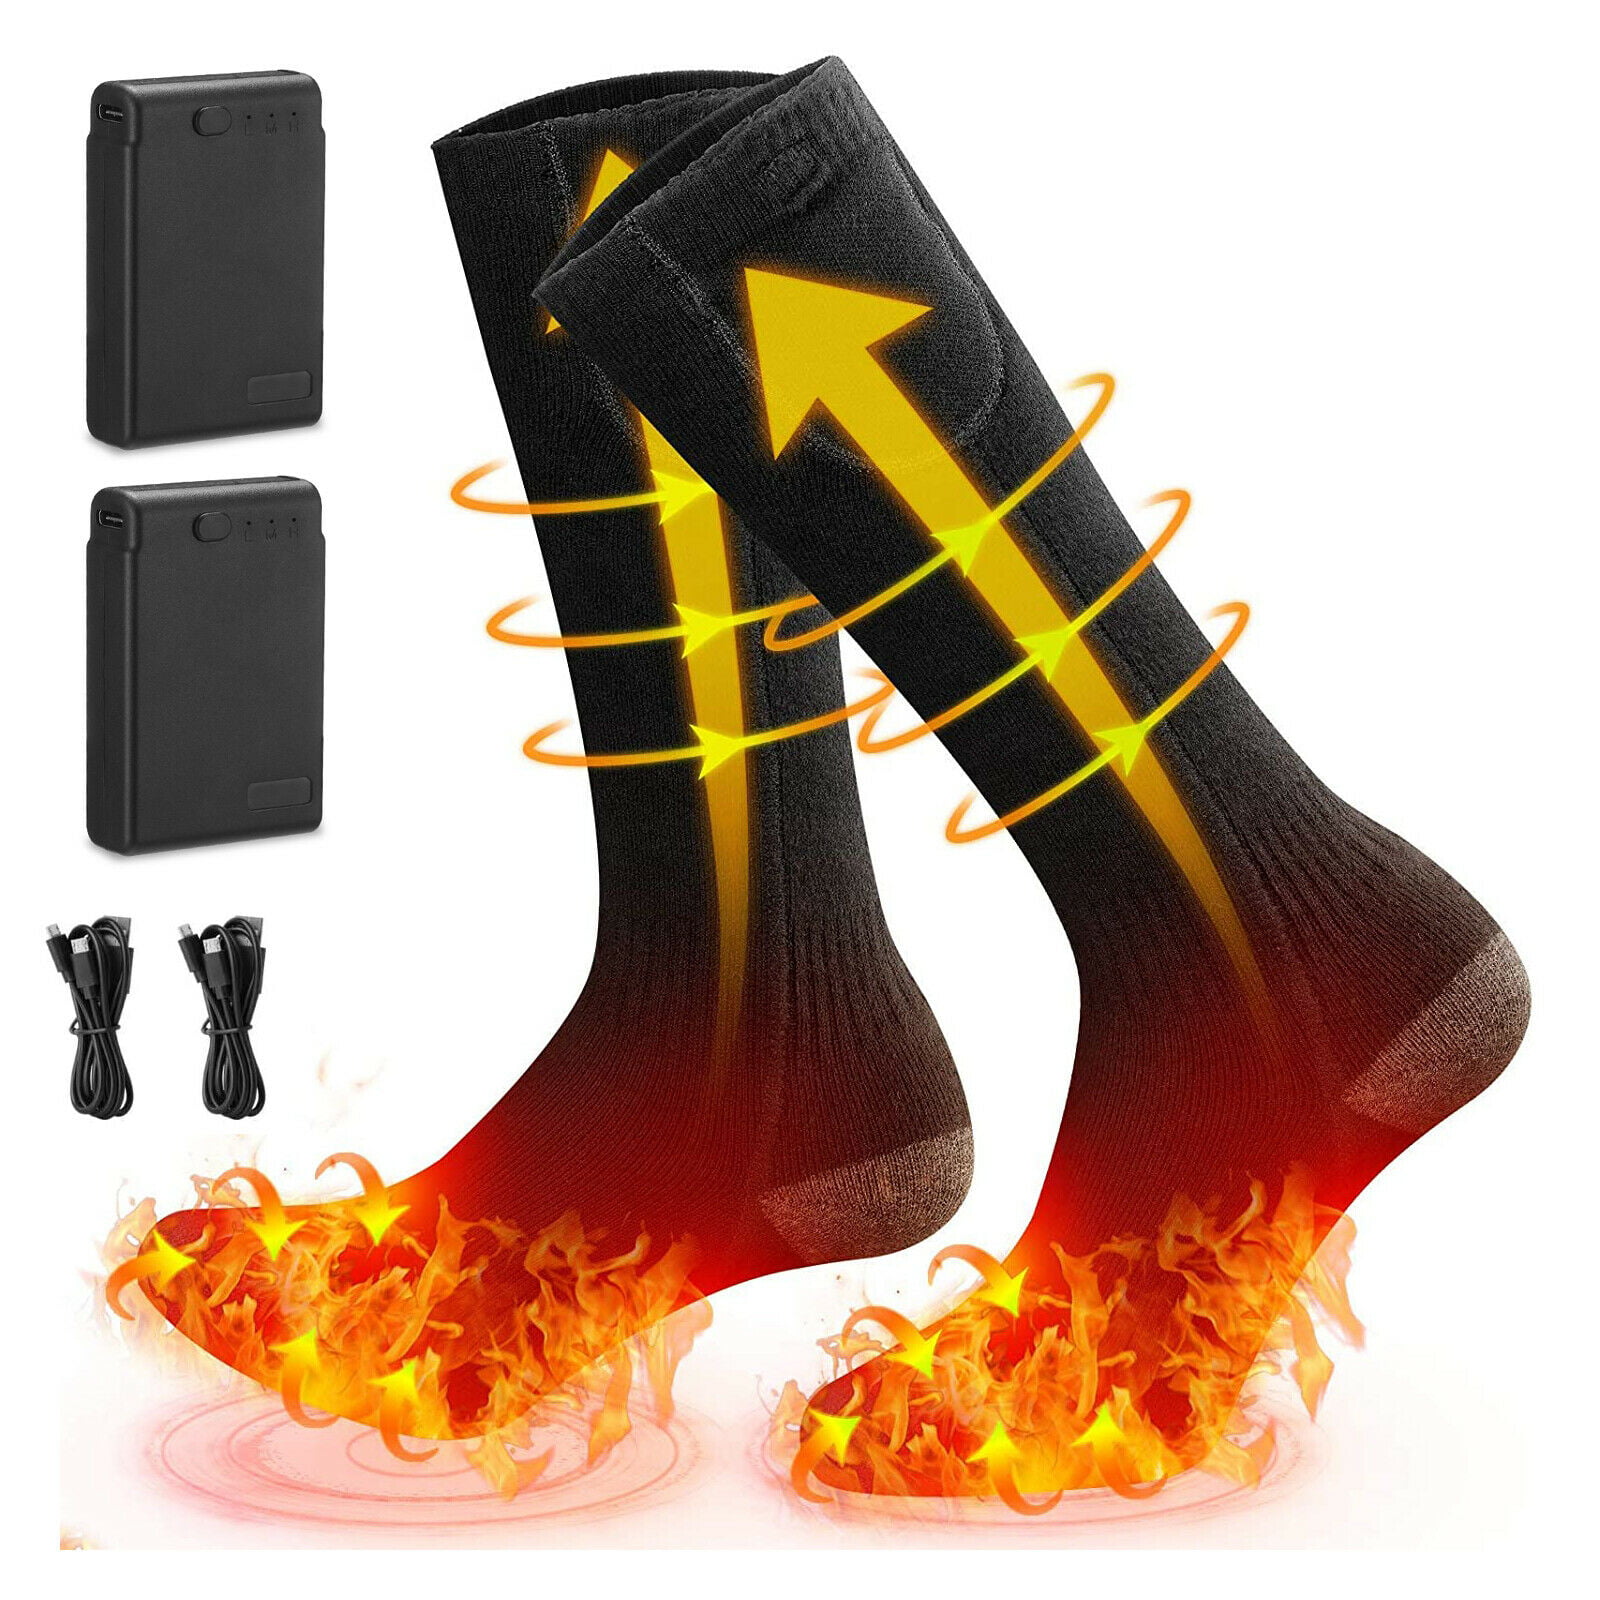 Details about   1 Pair Rechargeable Heated Socks Boot Feet Winter Warmer Skiing Hunting 3400mAh 